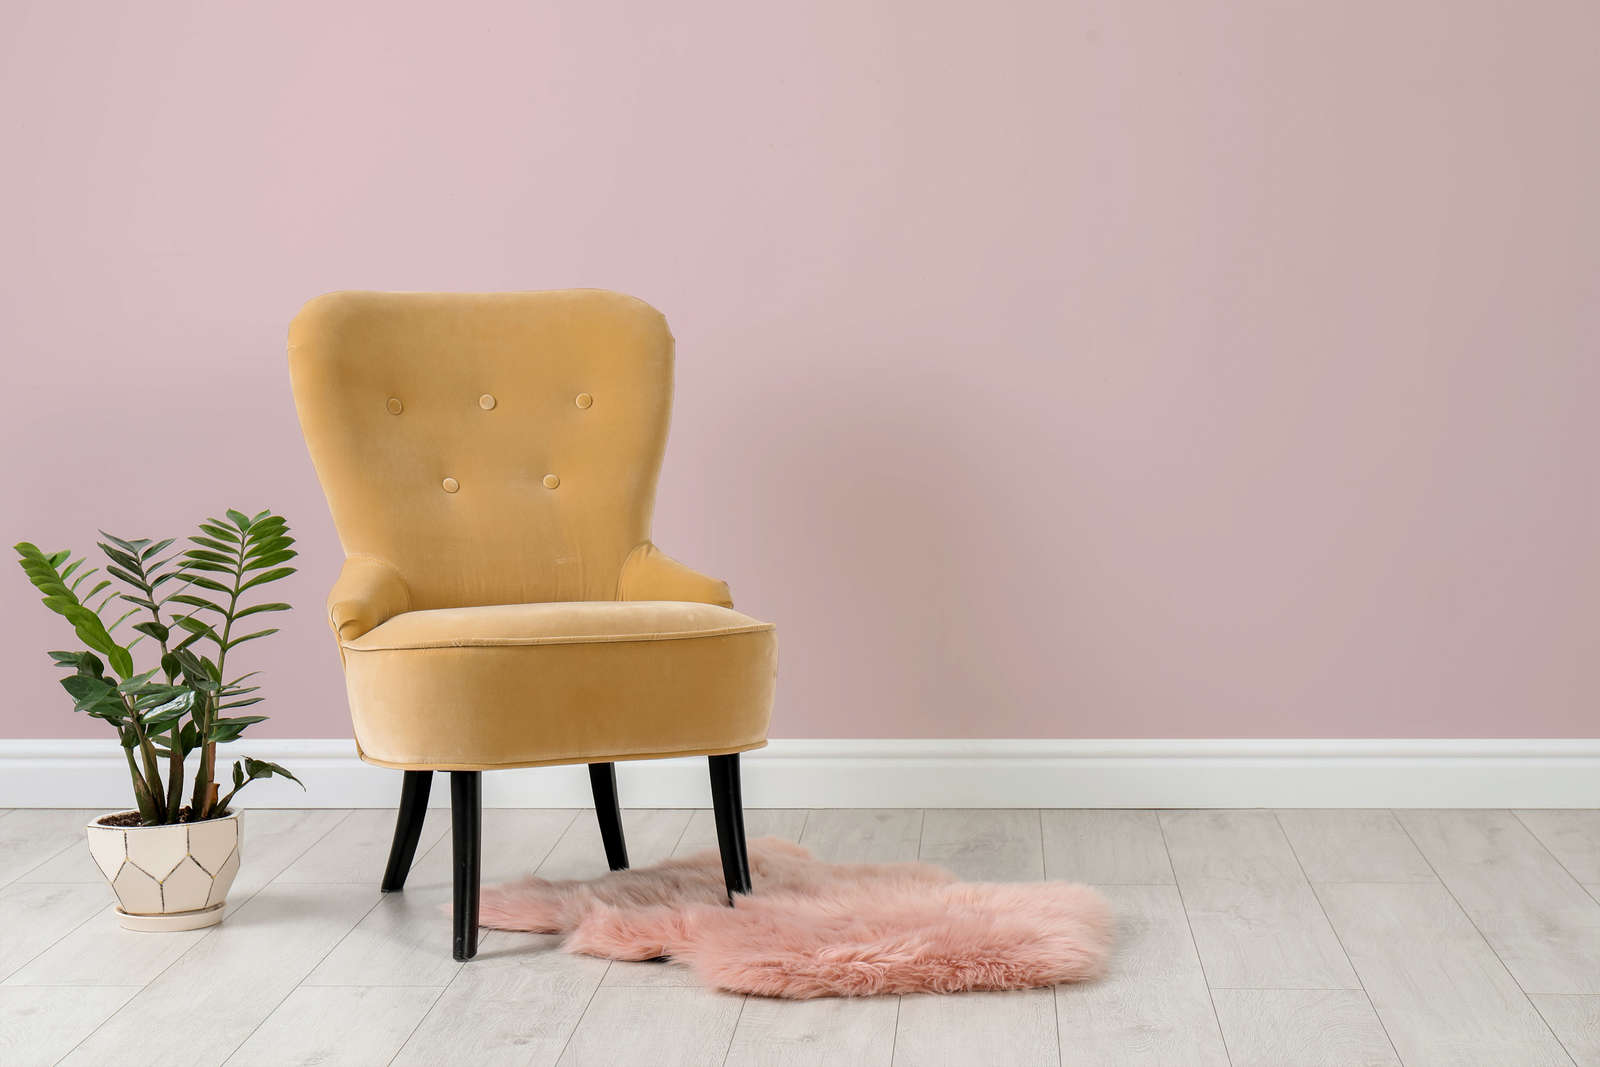             Wall Paint TCK7008 »Cute Cupcake« in delicate pink – 5.0 litre
        